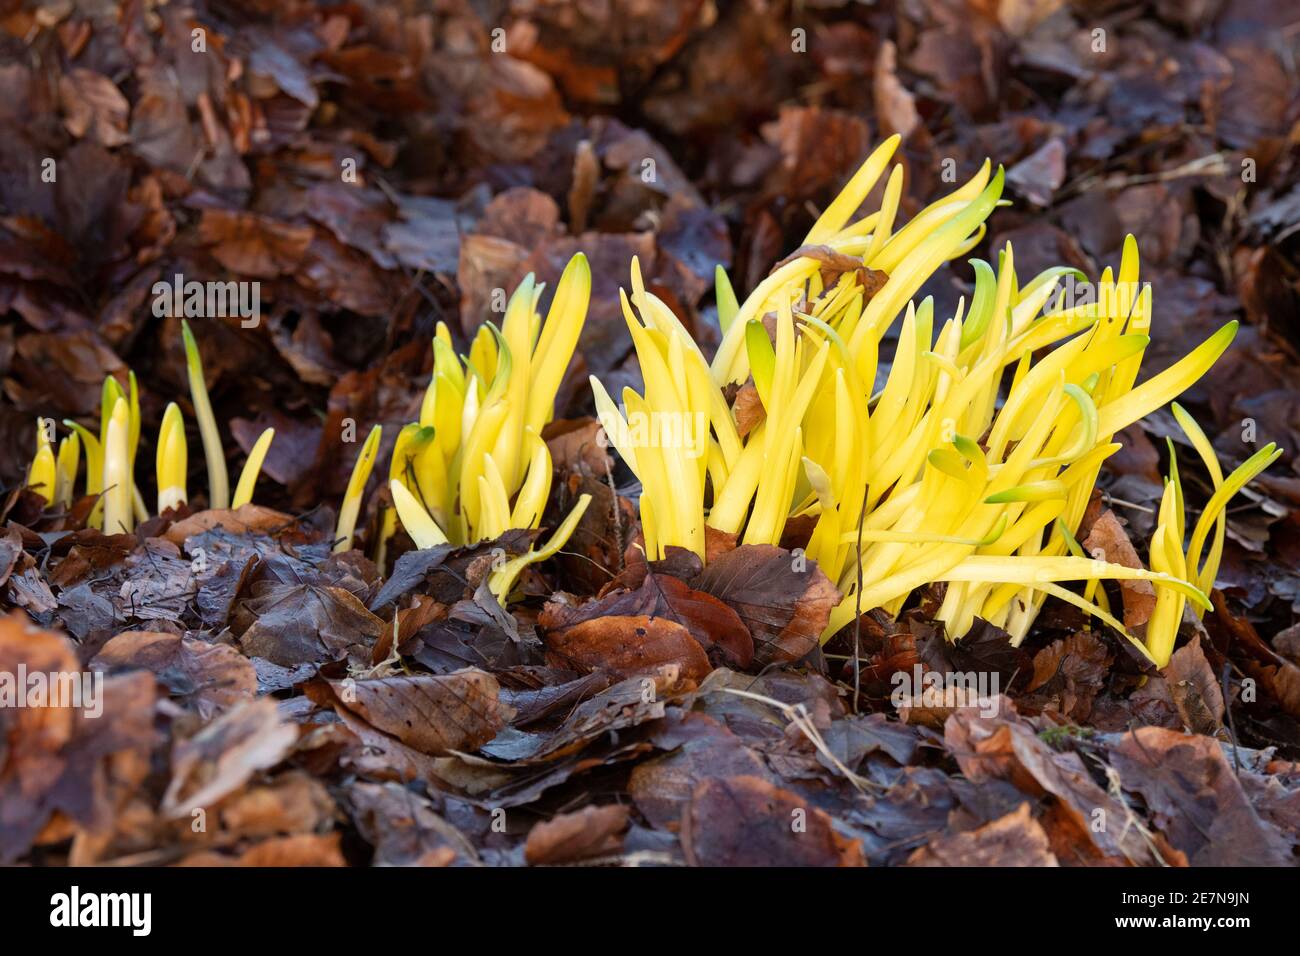 Chlorosis (yellowing) of daffodil leaves that have been covered with deep leaf litter while growing depriving them of sunlight - Scotland, UK Stock Photo